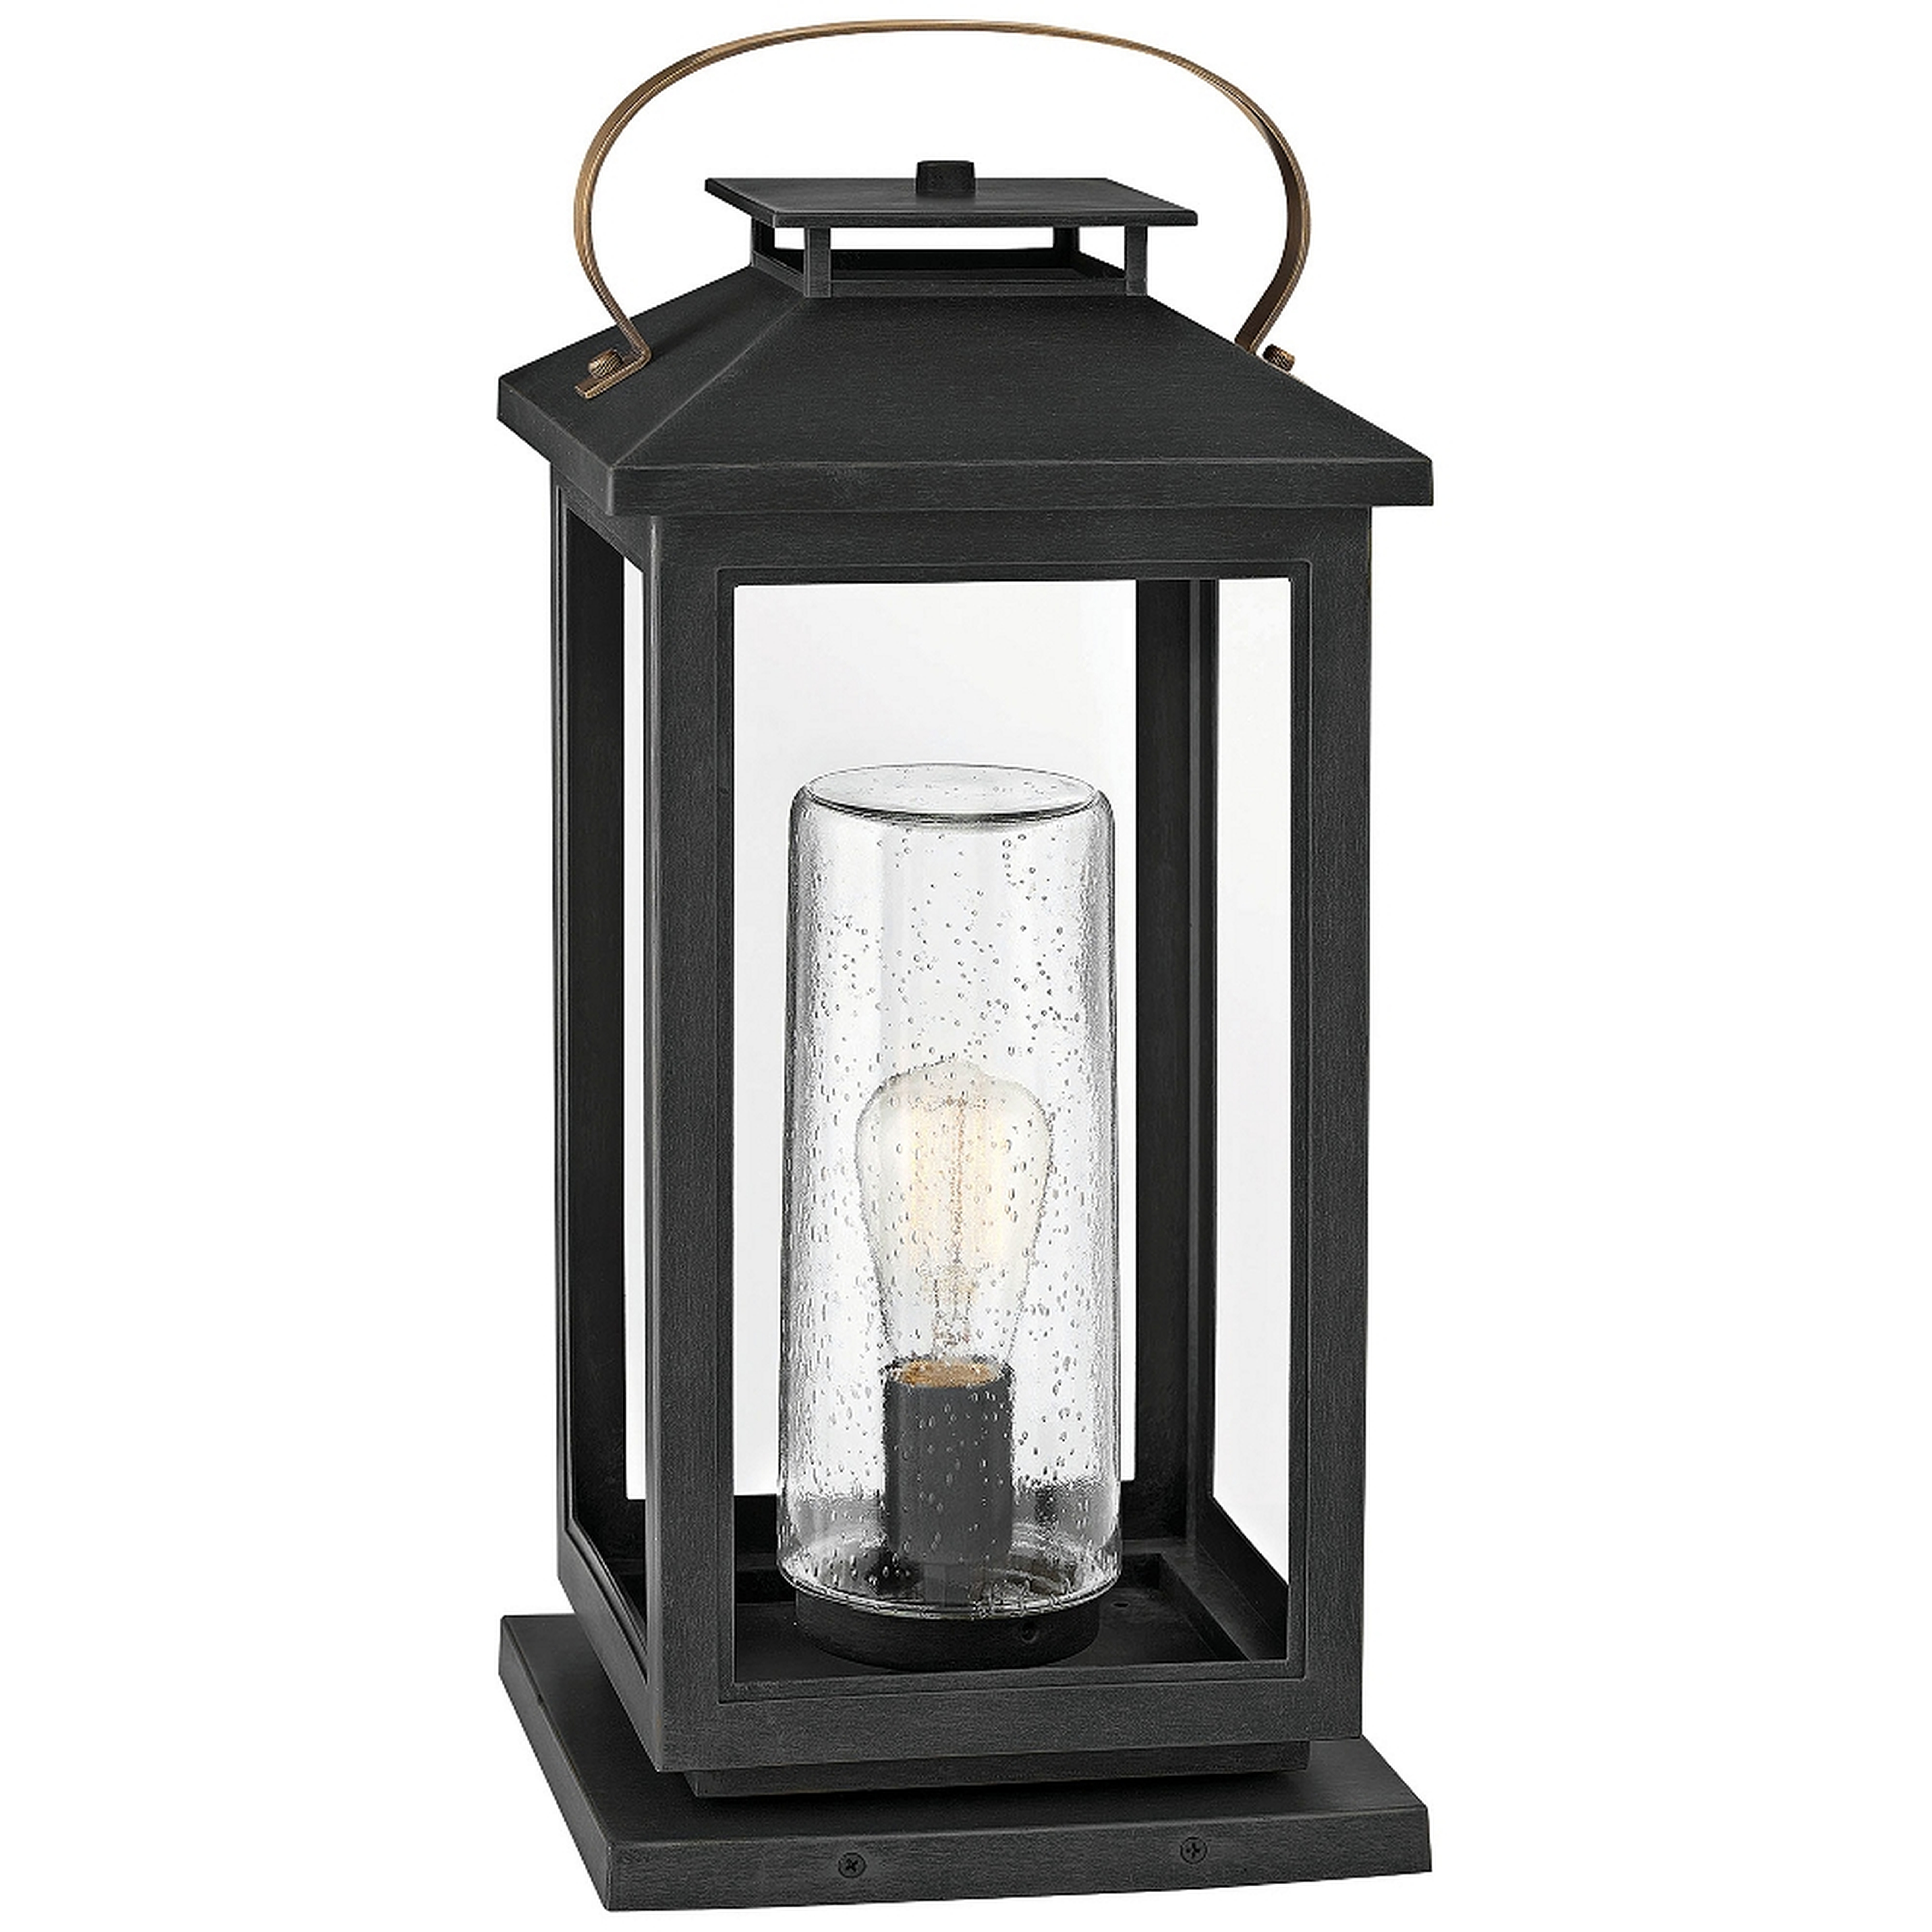 Hinkley Atwater 21 1/2" High Black Glass Outdoor Lantern - Style # 63J90 - Lamps Plus